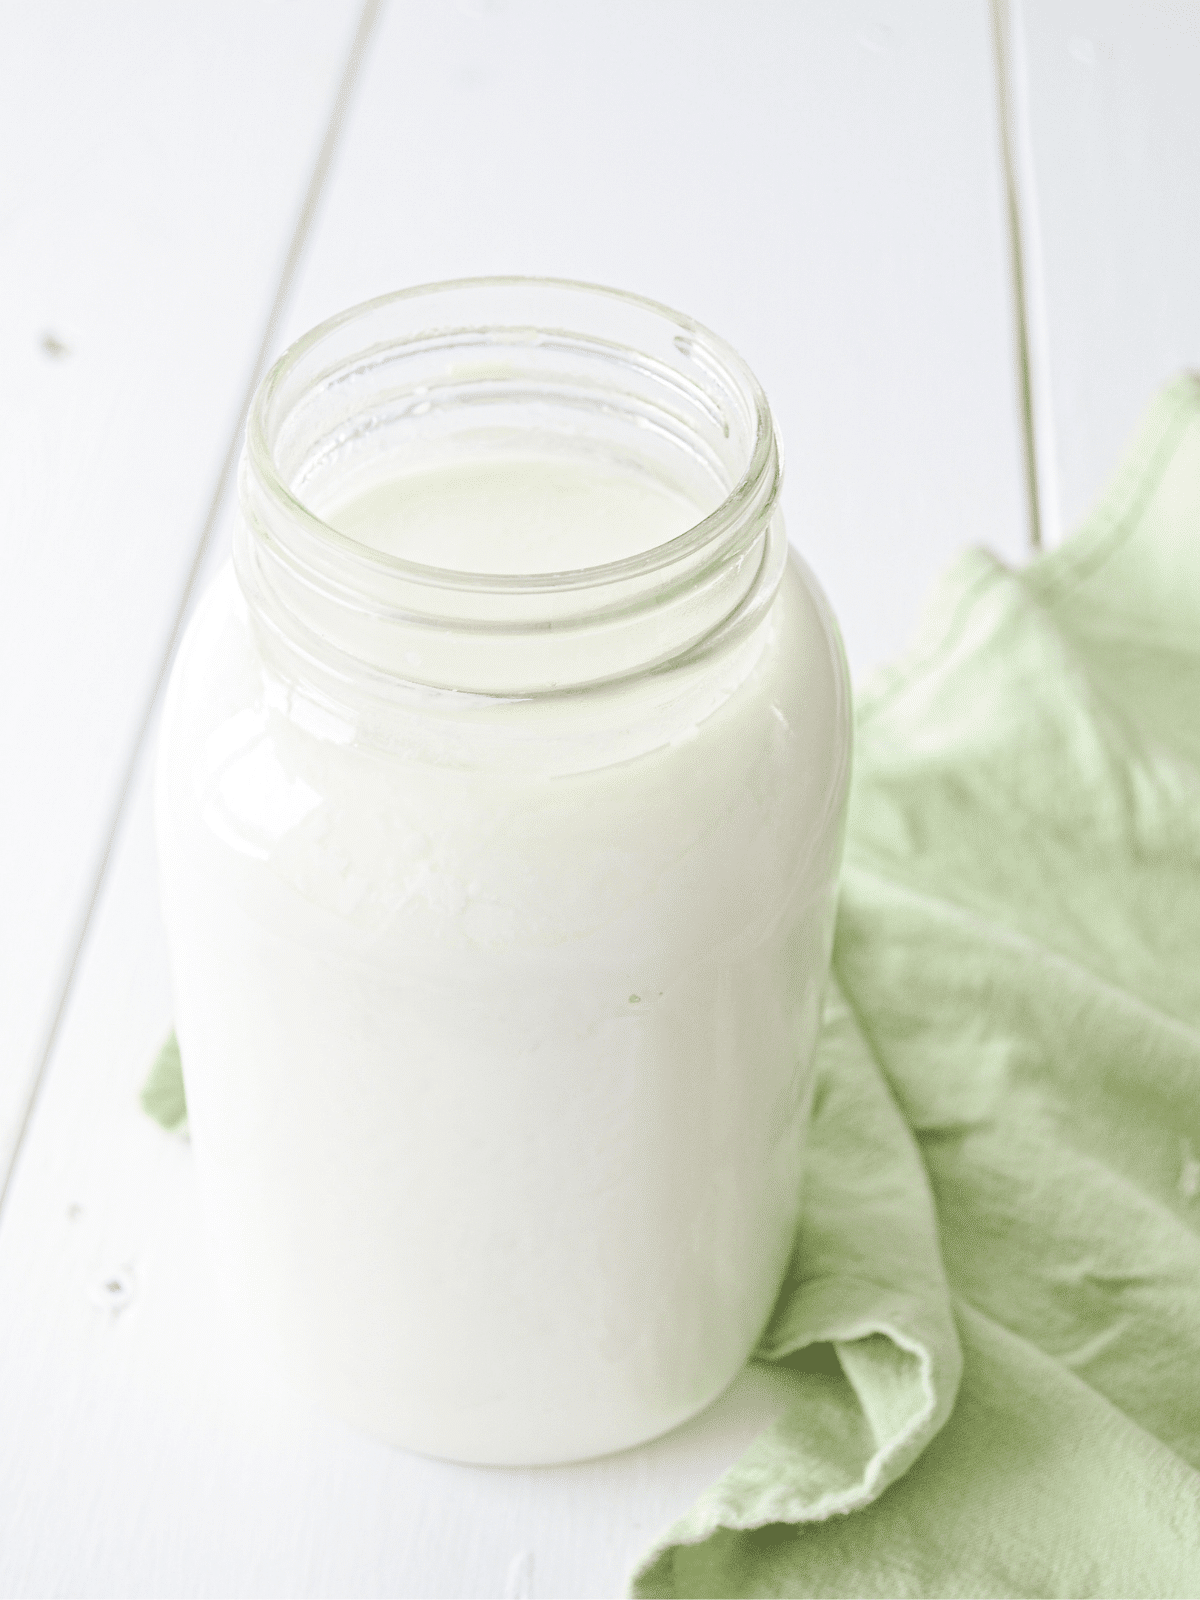 Want Clean Glass Milk Bottles? Here's How: - by Sally Oh